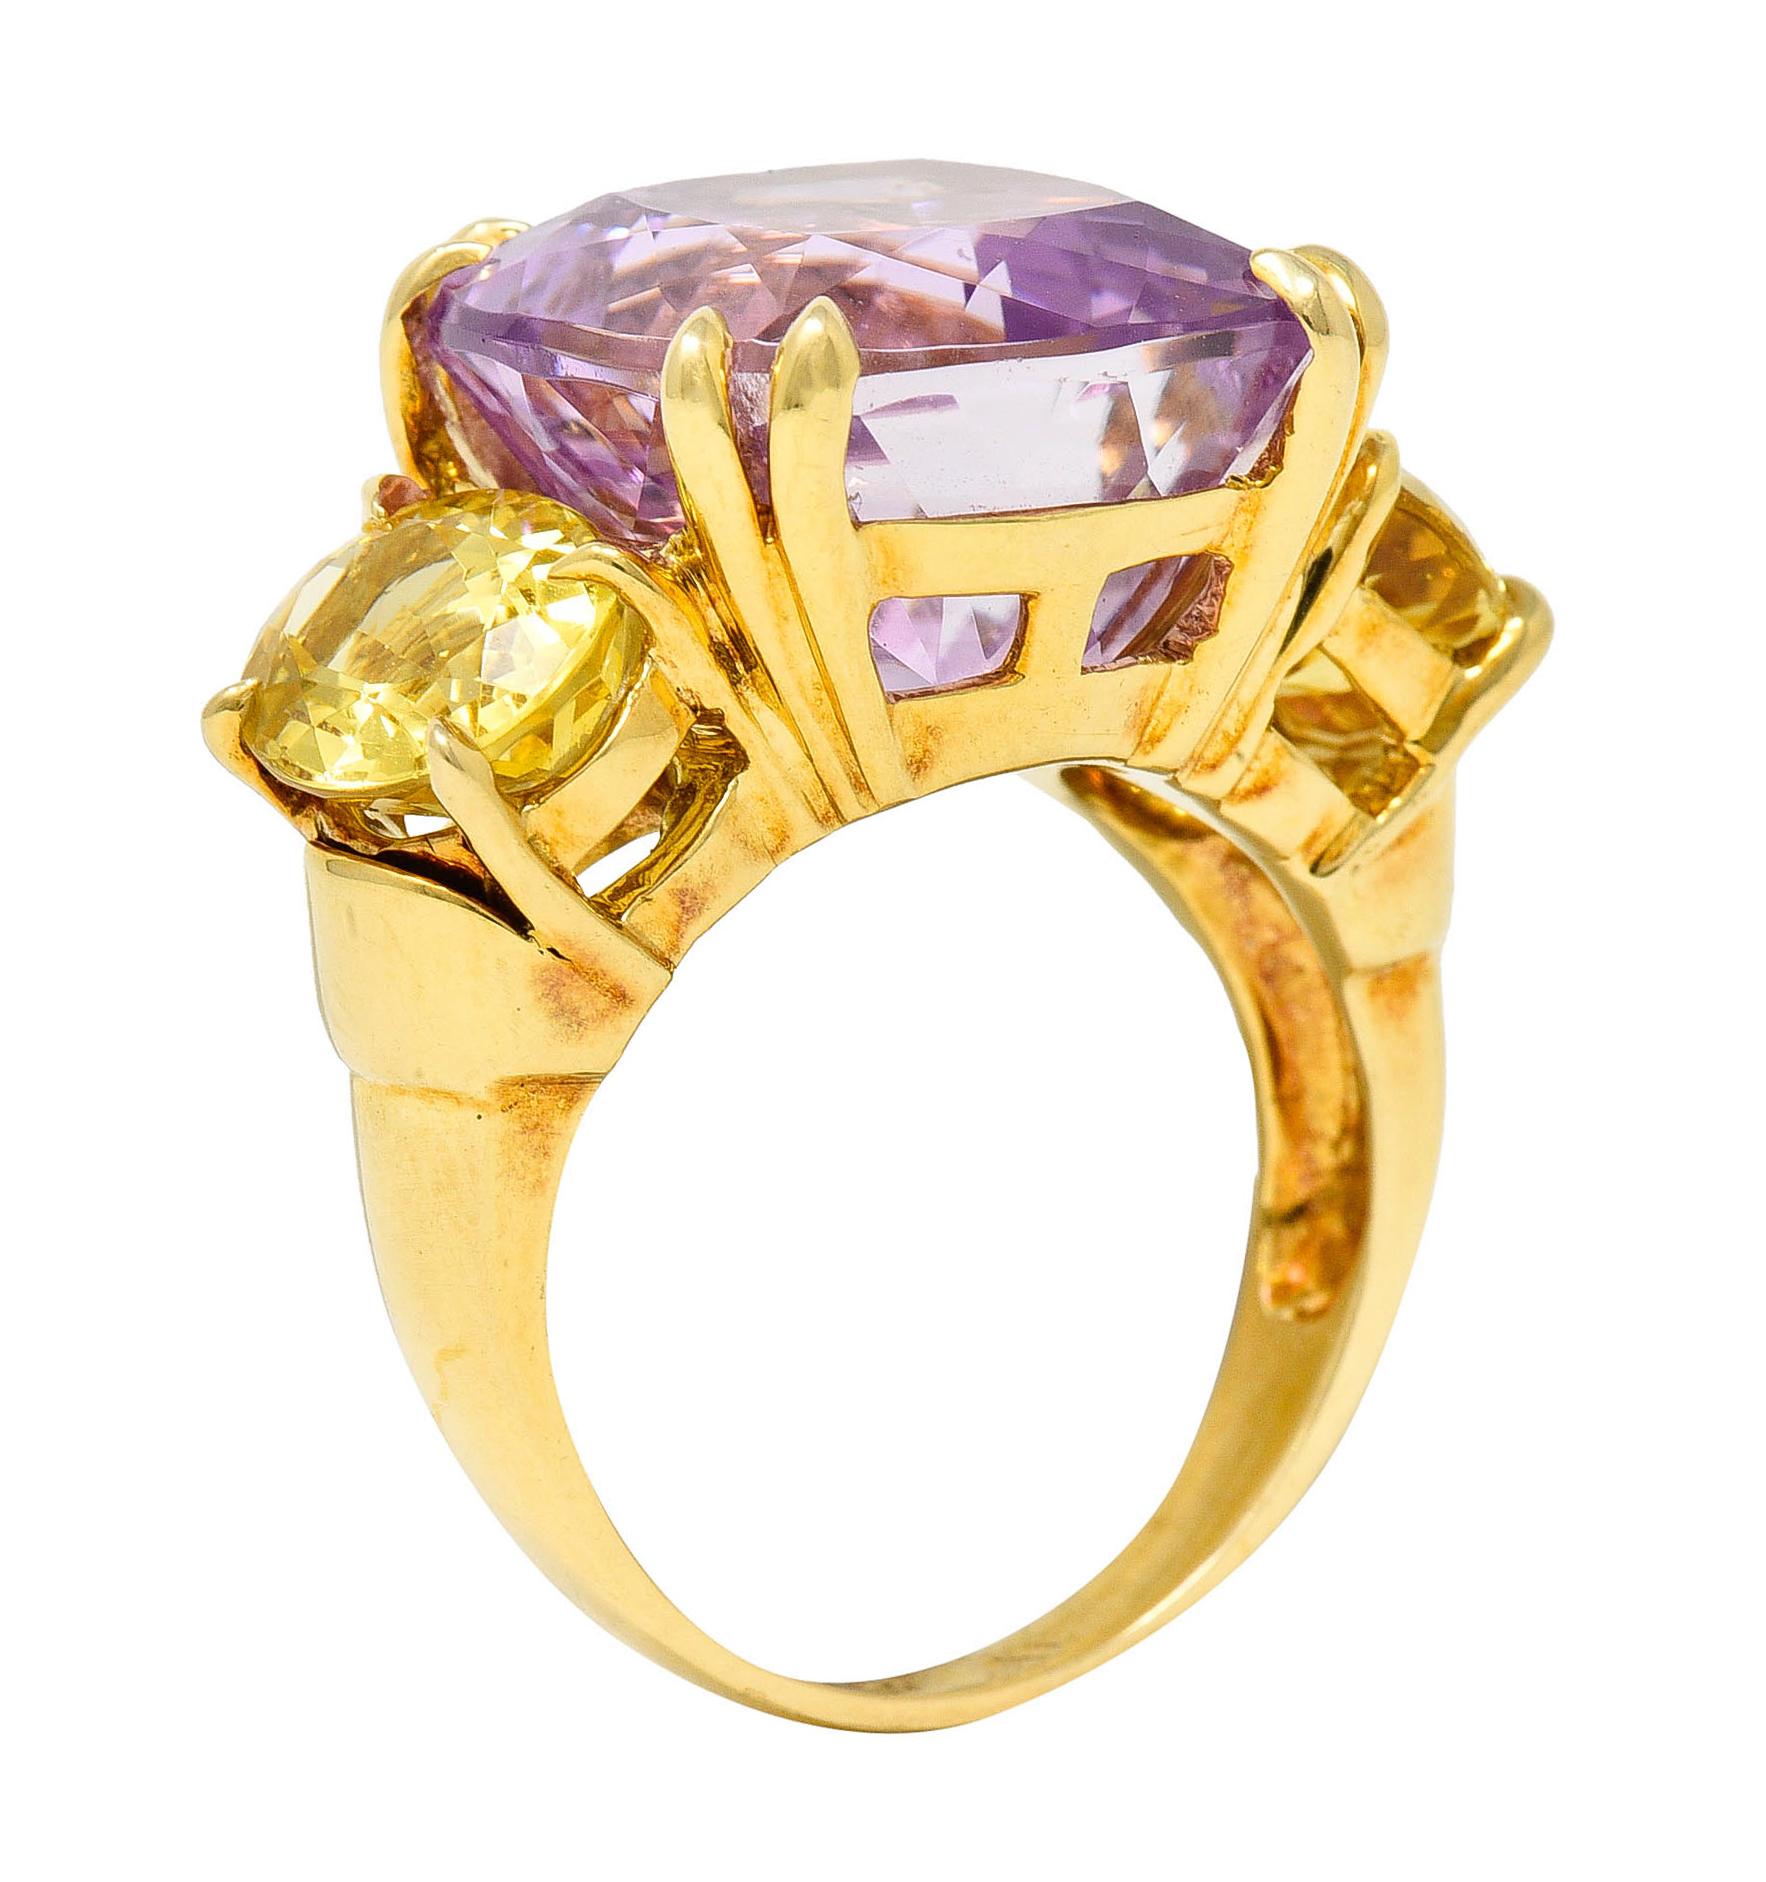 Substantial three stone ring centering a mixed cushion cut kunzite

Transparent and vividly lavender pink in color while measuring 14.1 x 14.0 mm

Basket set by split talon prongs and flanked by very well matched oval cut topaz

Bright yellow in